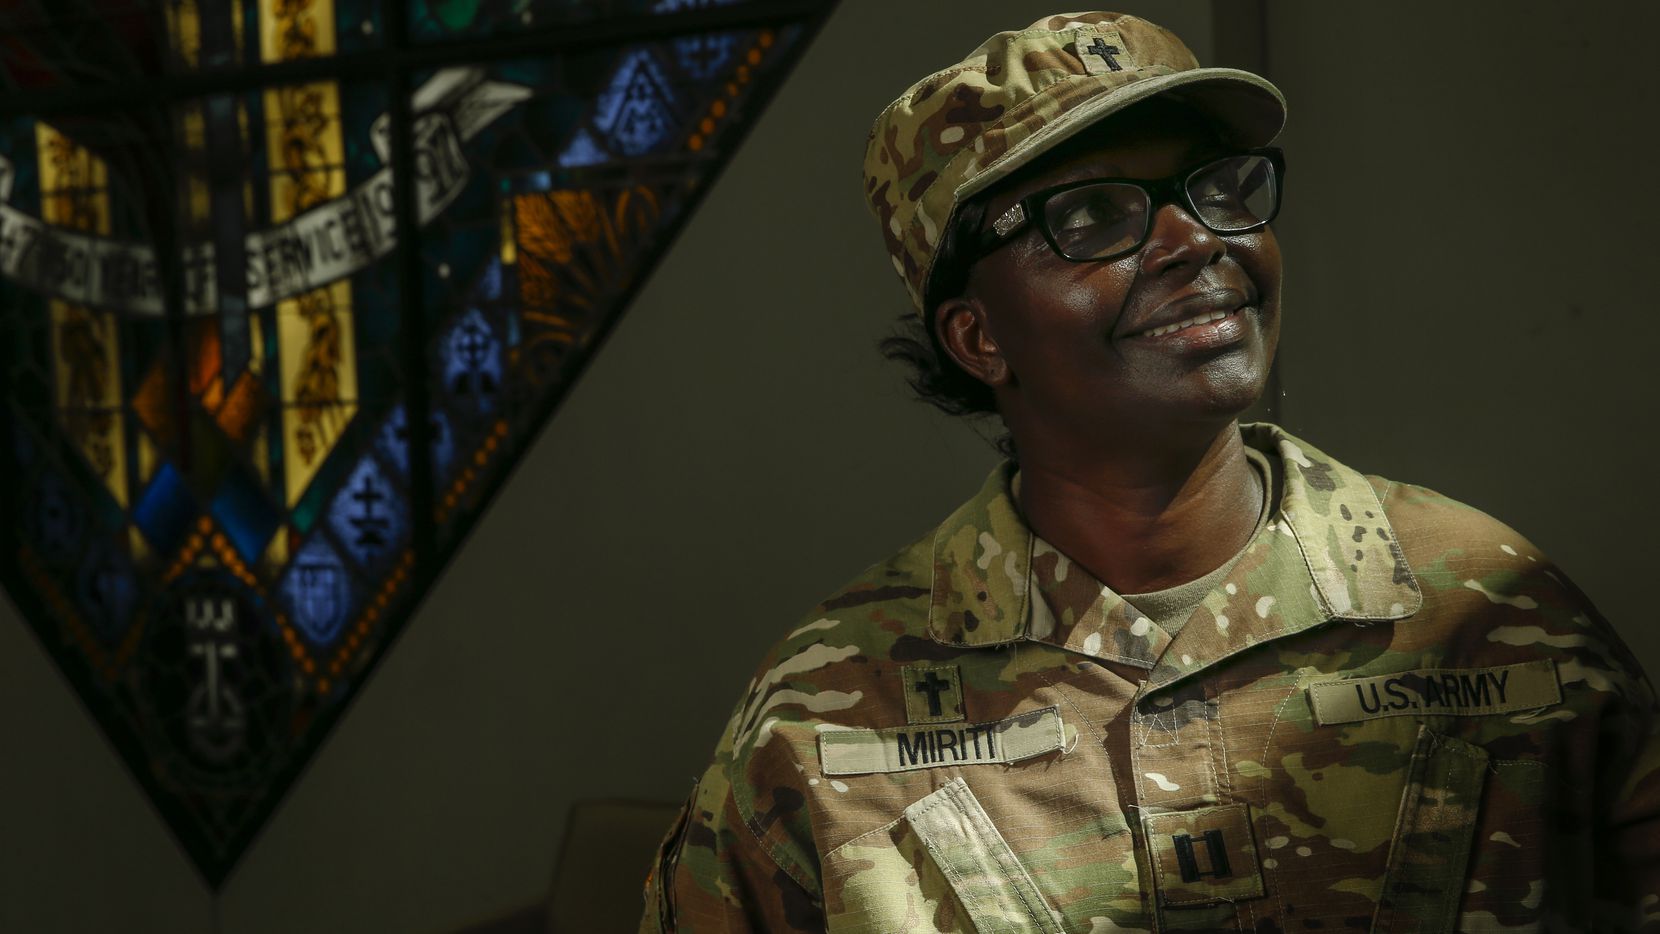 U.S. Army Chaplain Mary Miriti at Lovers Lane United Methodist Church, which was her first church home when she arrived in Dallas from Nairobi, Kenya, in 2003. An ordained Methodist minister, Miriti now is senior pastor of Oasis Global United Methodist Church.